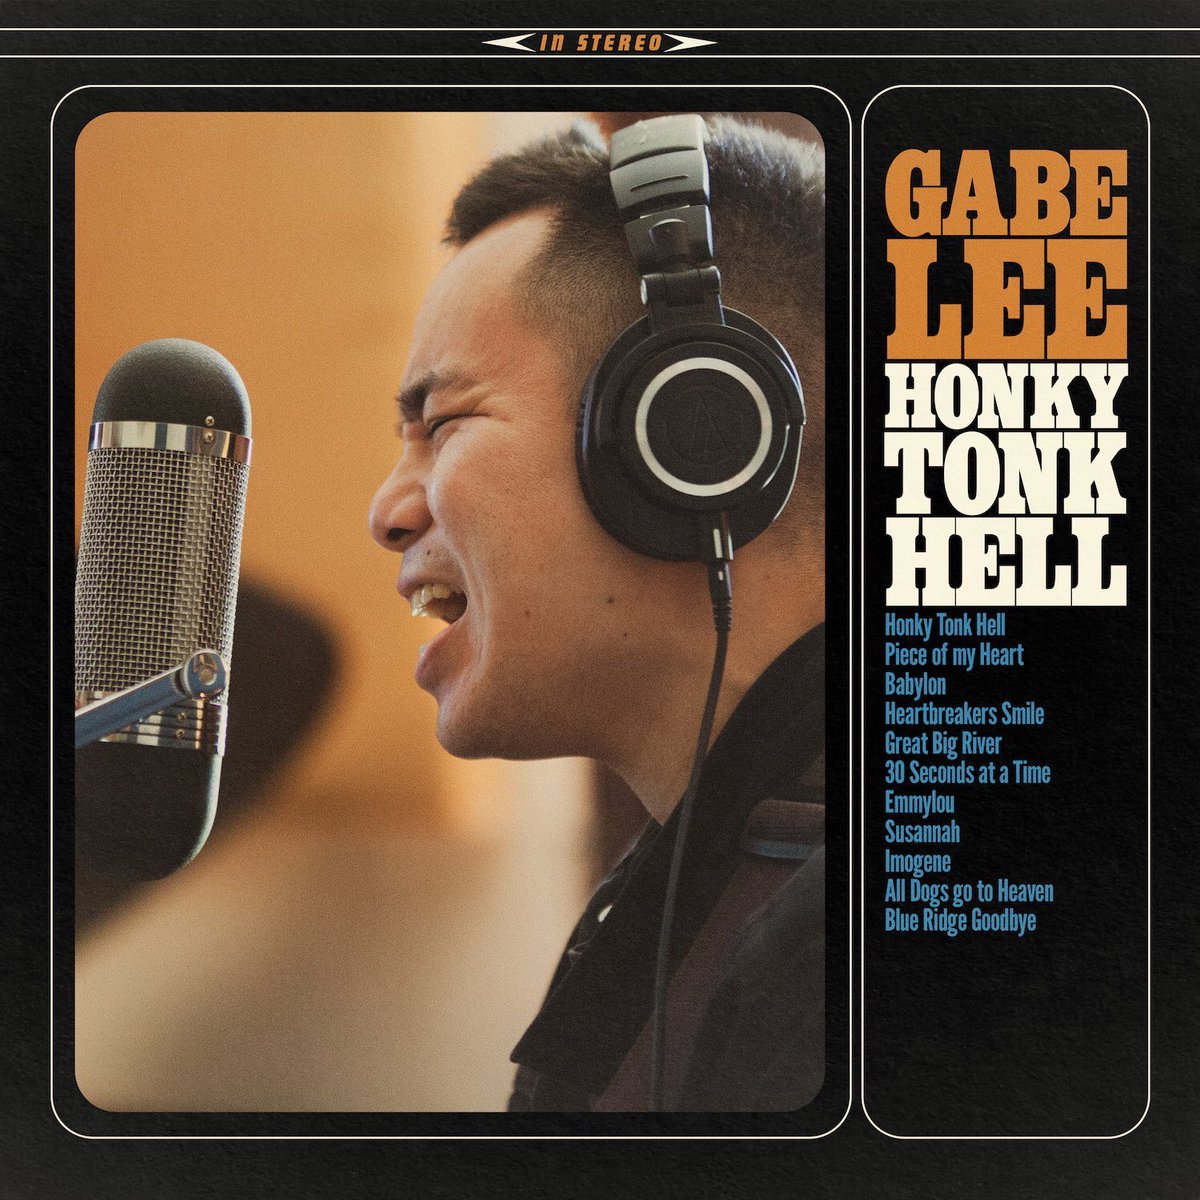 65. Gabe Lee - Honky Tonk Hell (one of the most exciting voices in country expands to a full band sound. Fully retro in feel)